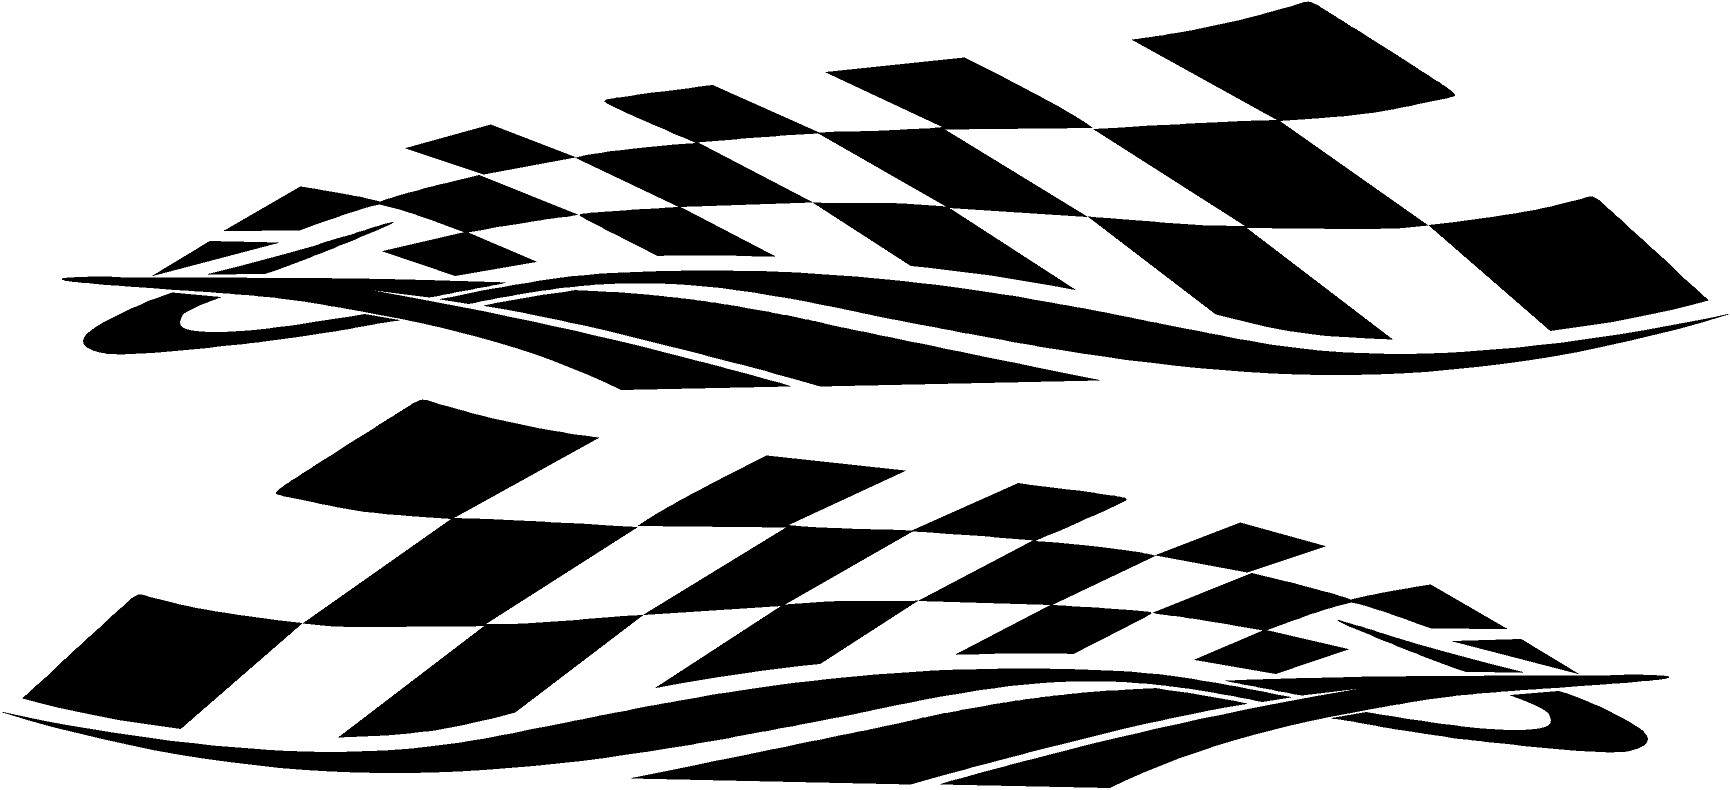 checkered flag car decals, truck vinyl racing graphics | Xtreme ...